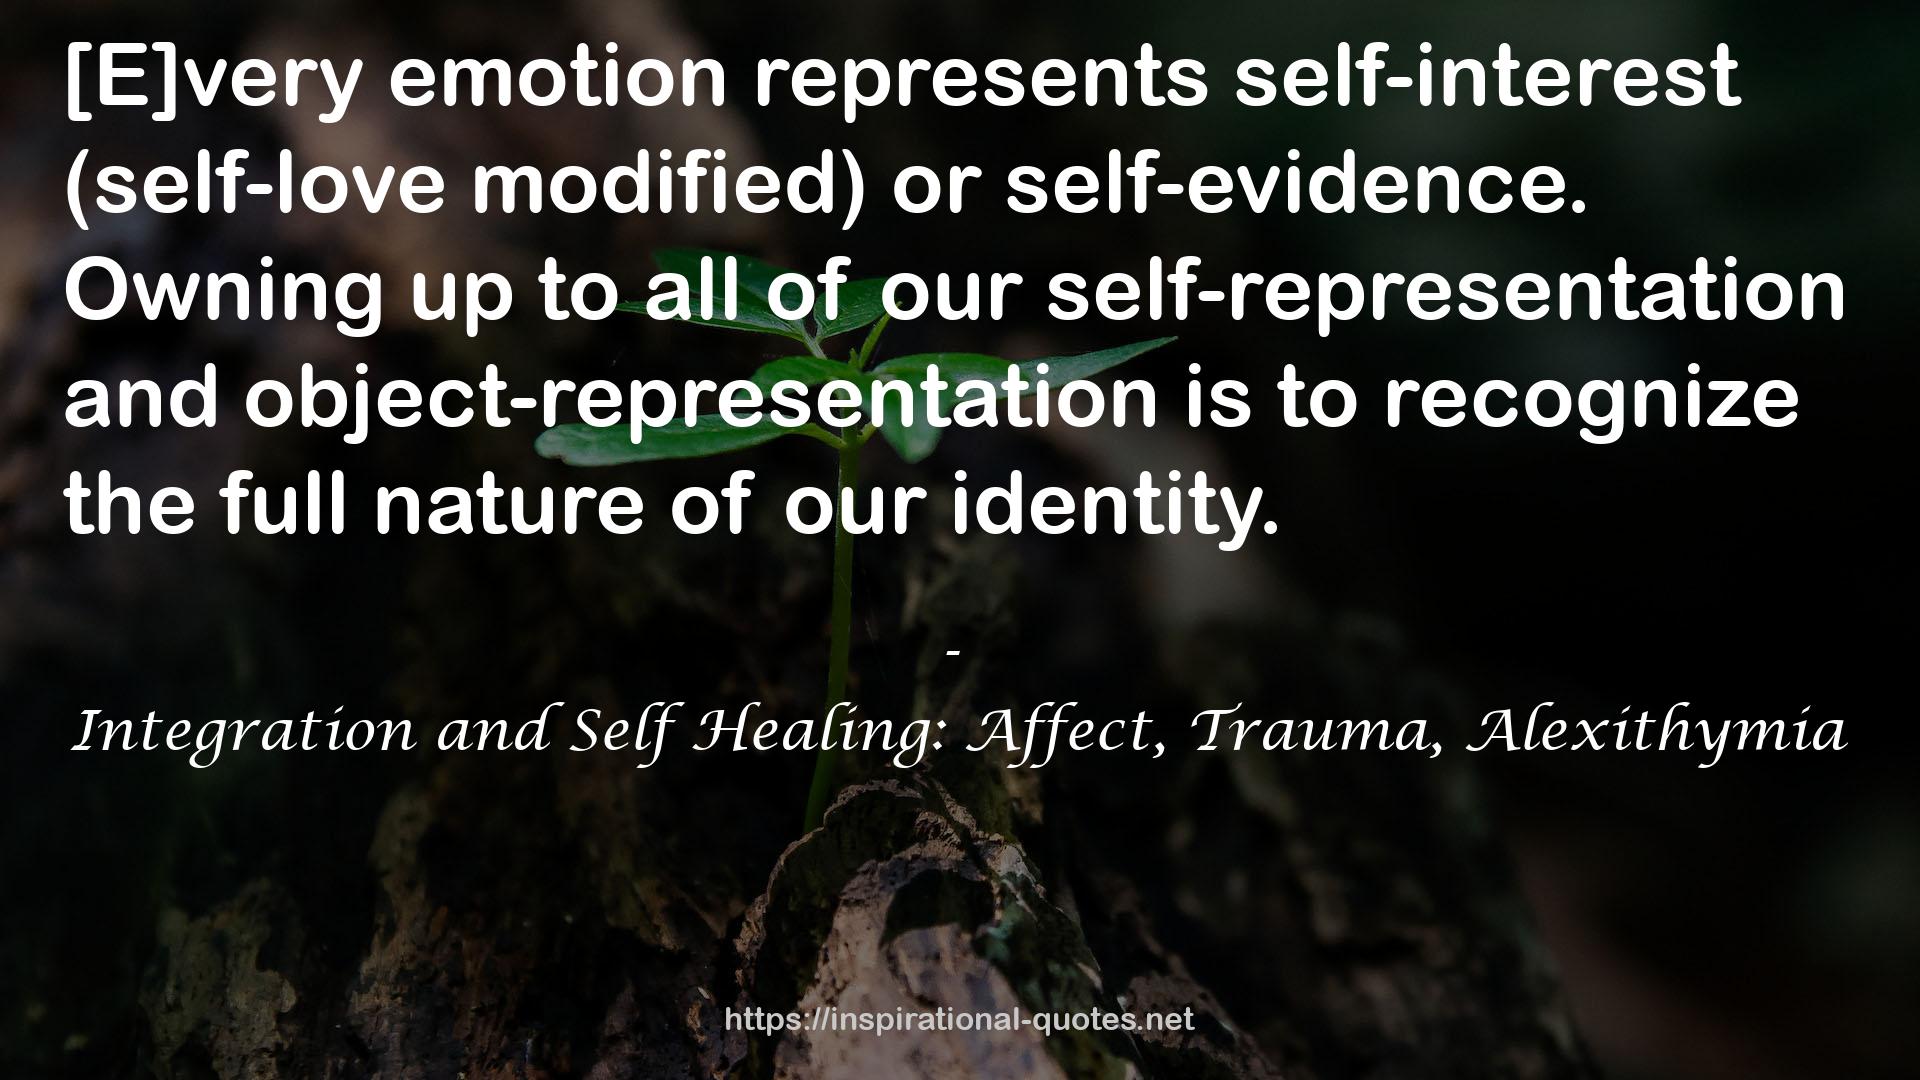 Integration and Self Healing: Affect, Trauma, Alexithymia QUOTES